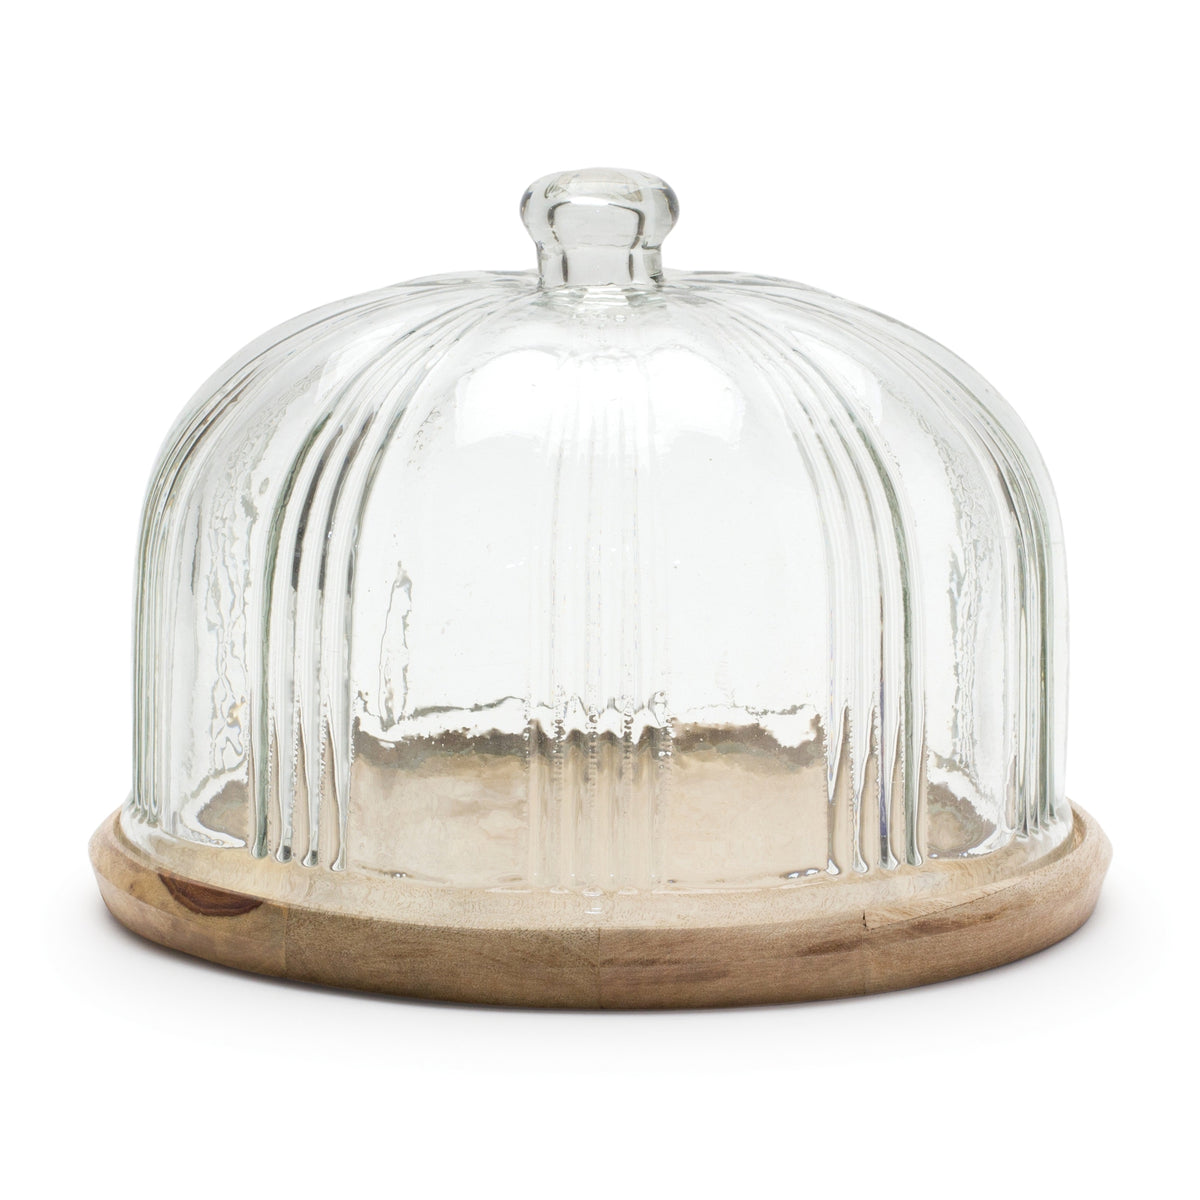 Glass and Wood Domed Cloche Display